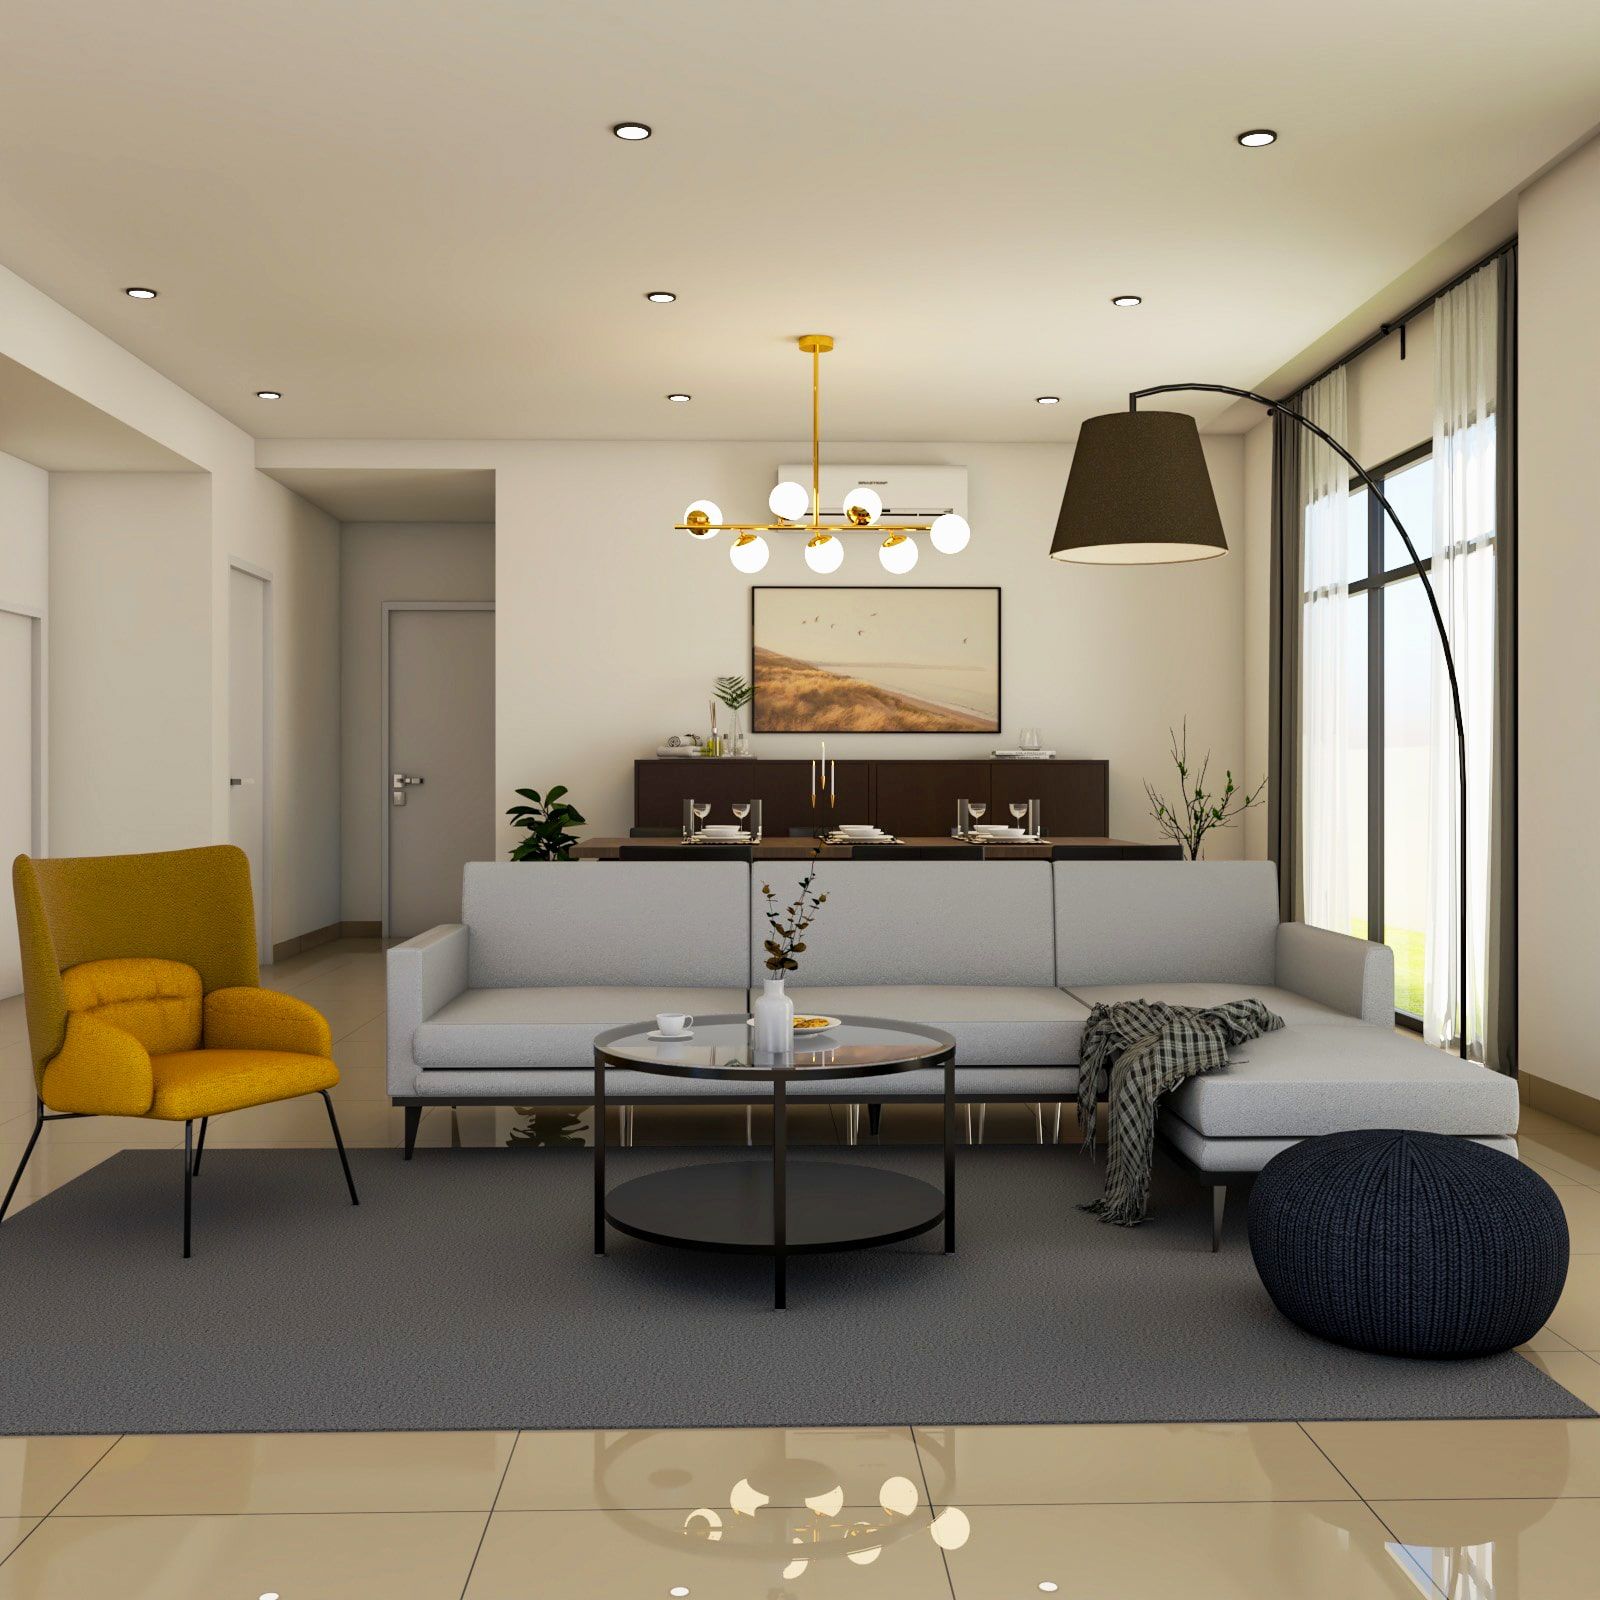 Contemporary Living Room Design With Grey Sectional Sofa And Yellow Accent Chair